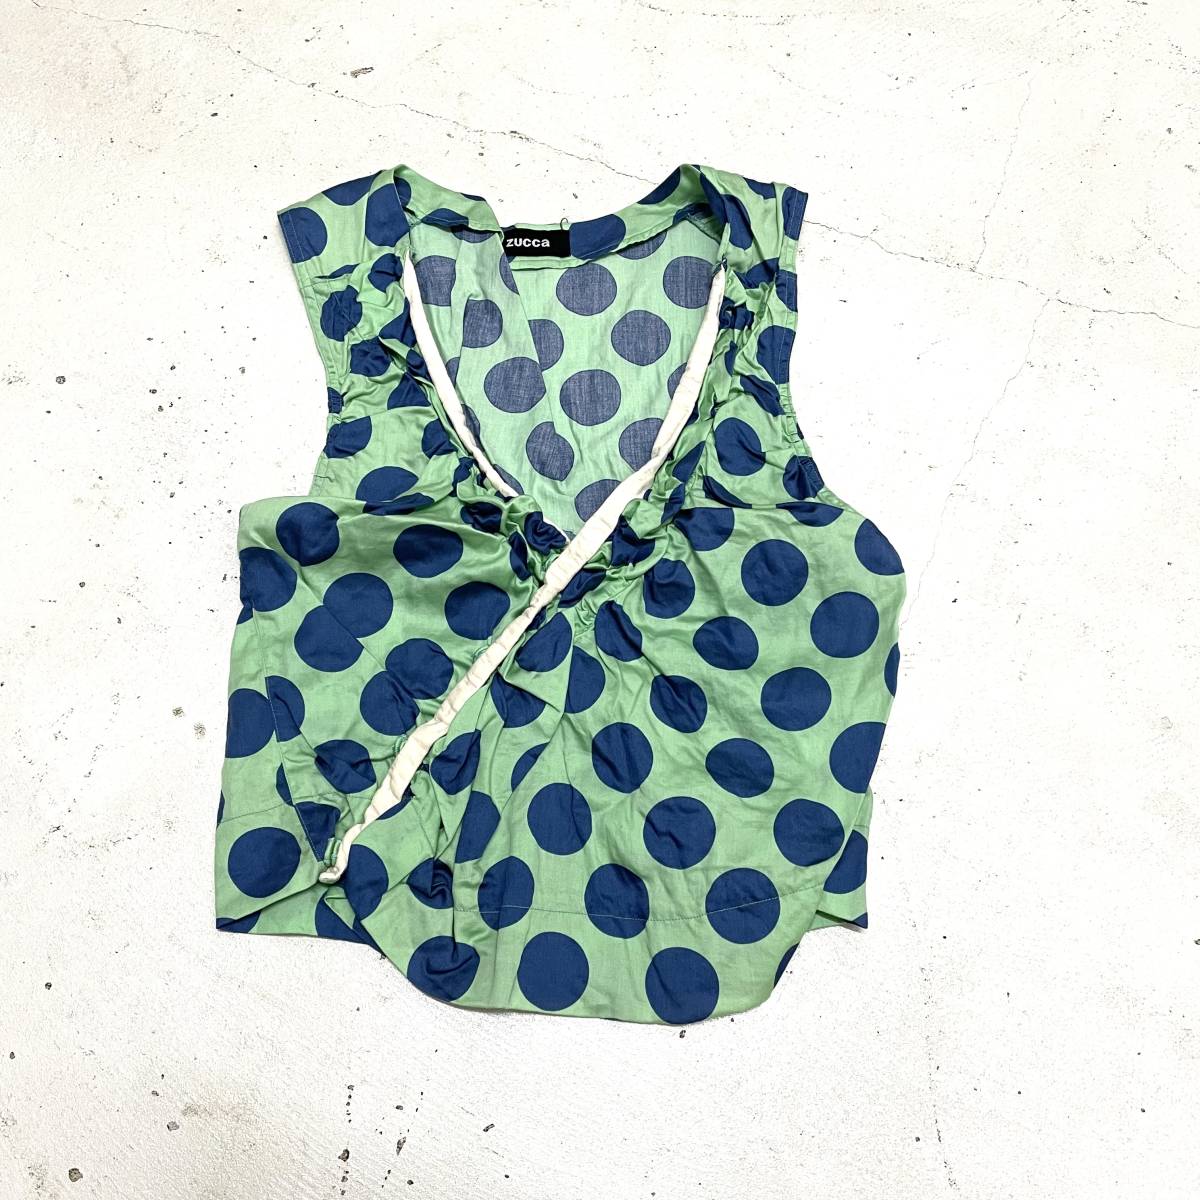  sample goods zucca polka dot no sleeve blouse dot pattern / Zucca rare tank top shirt Layered retro not for sale Vintage 